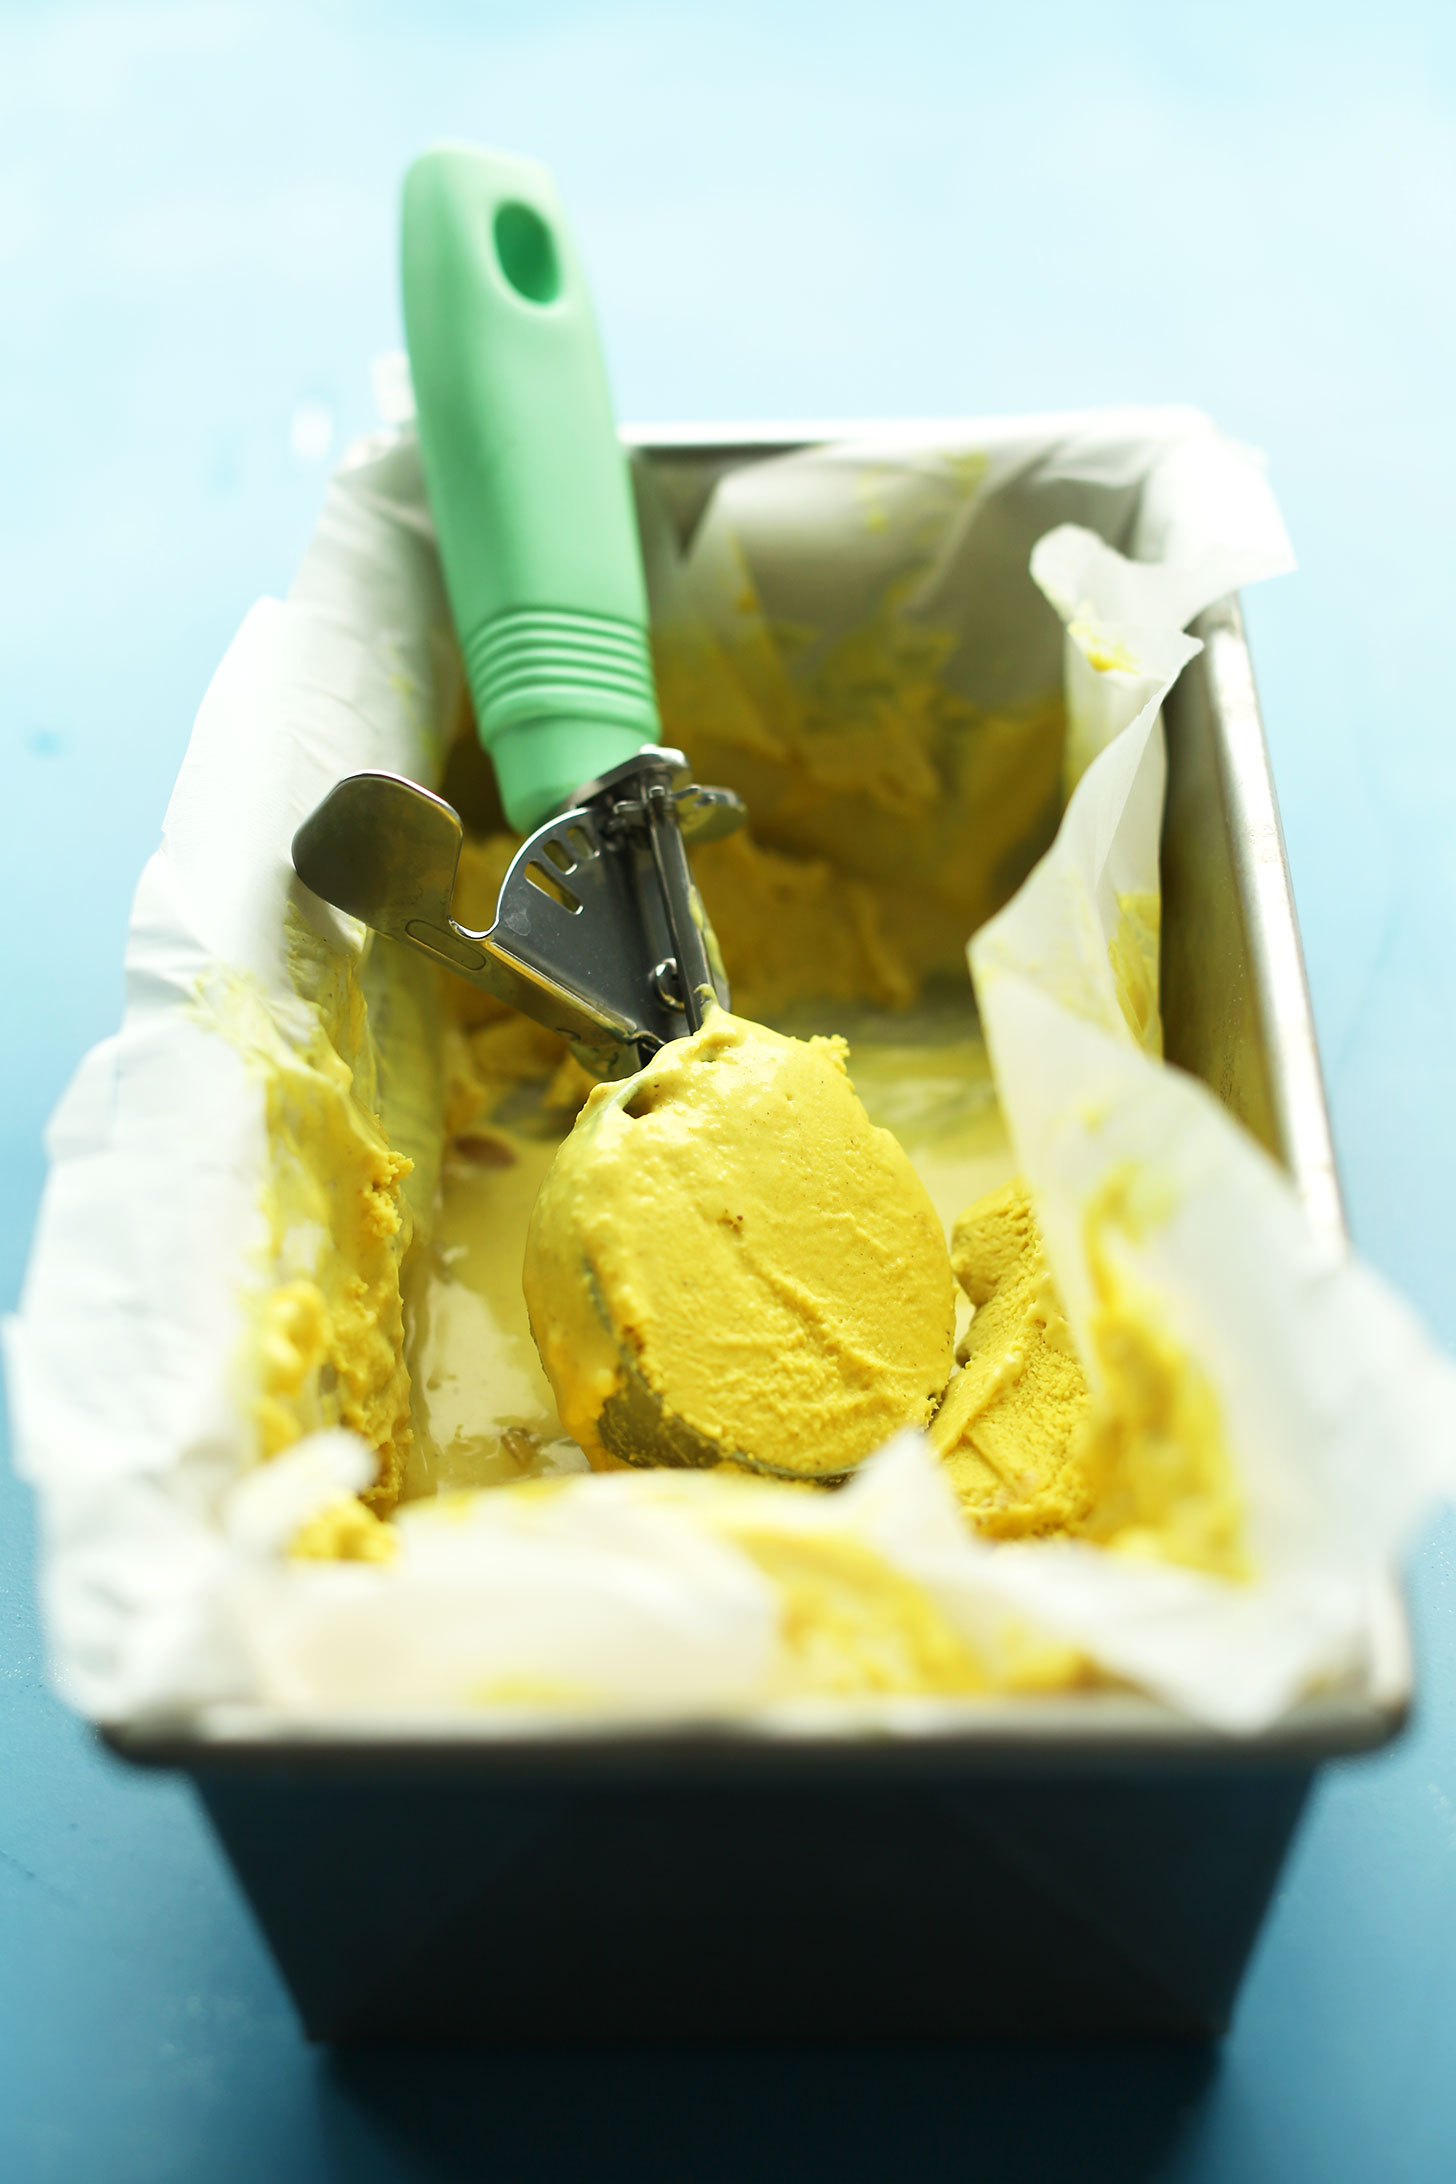 Grabbing a scoop of healthy vegan ice cream made with turmeric